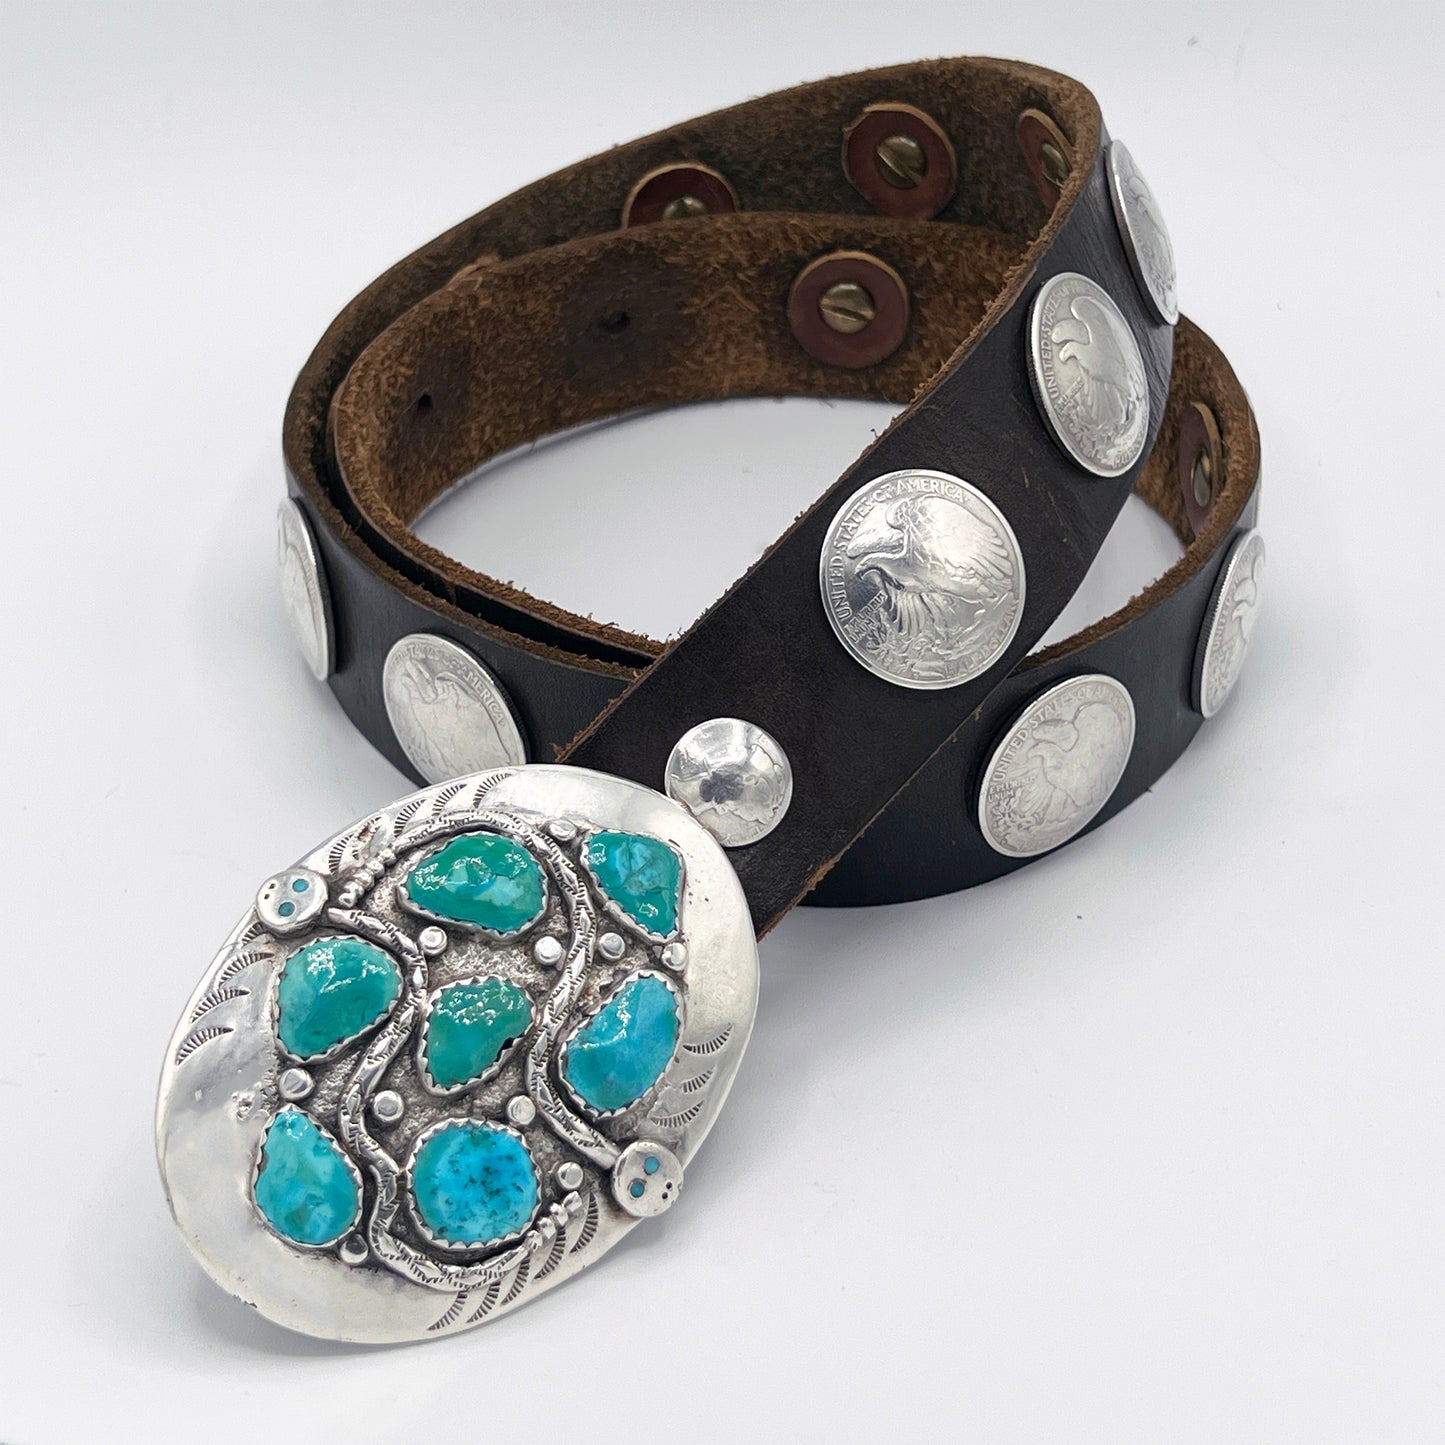 Native American Indian Sterling Silver and Turquoise Belt Buckle, Leather Belt, Walking Liberty Coins